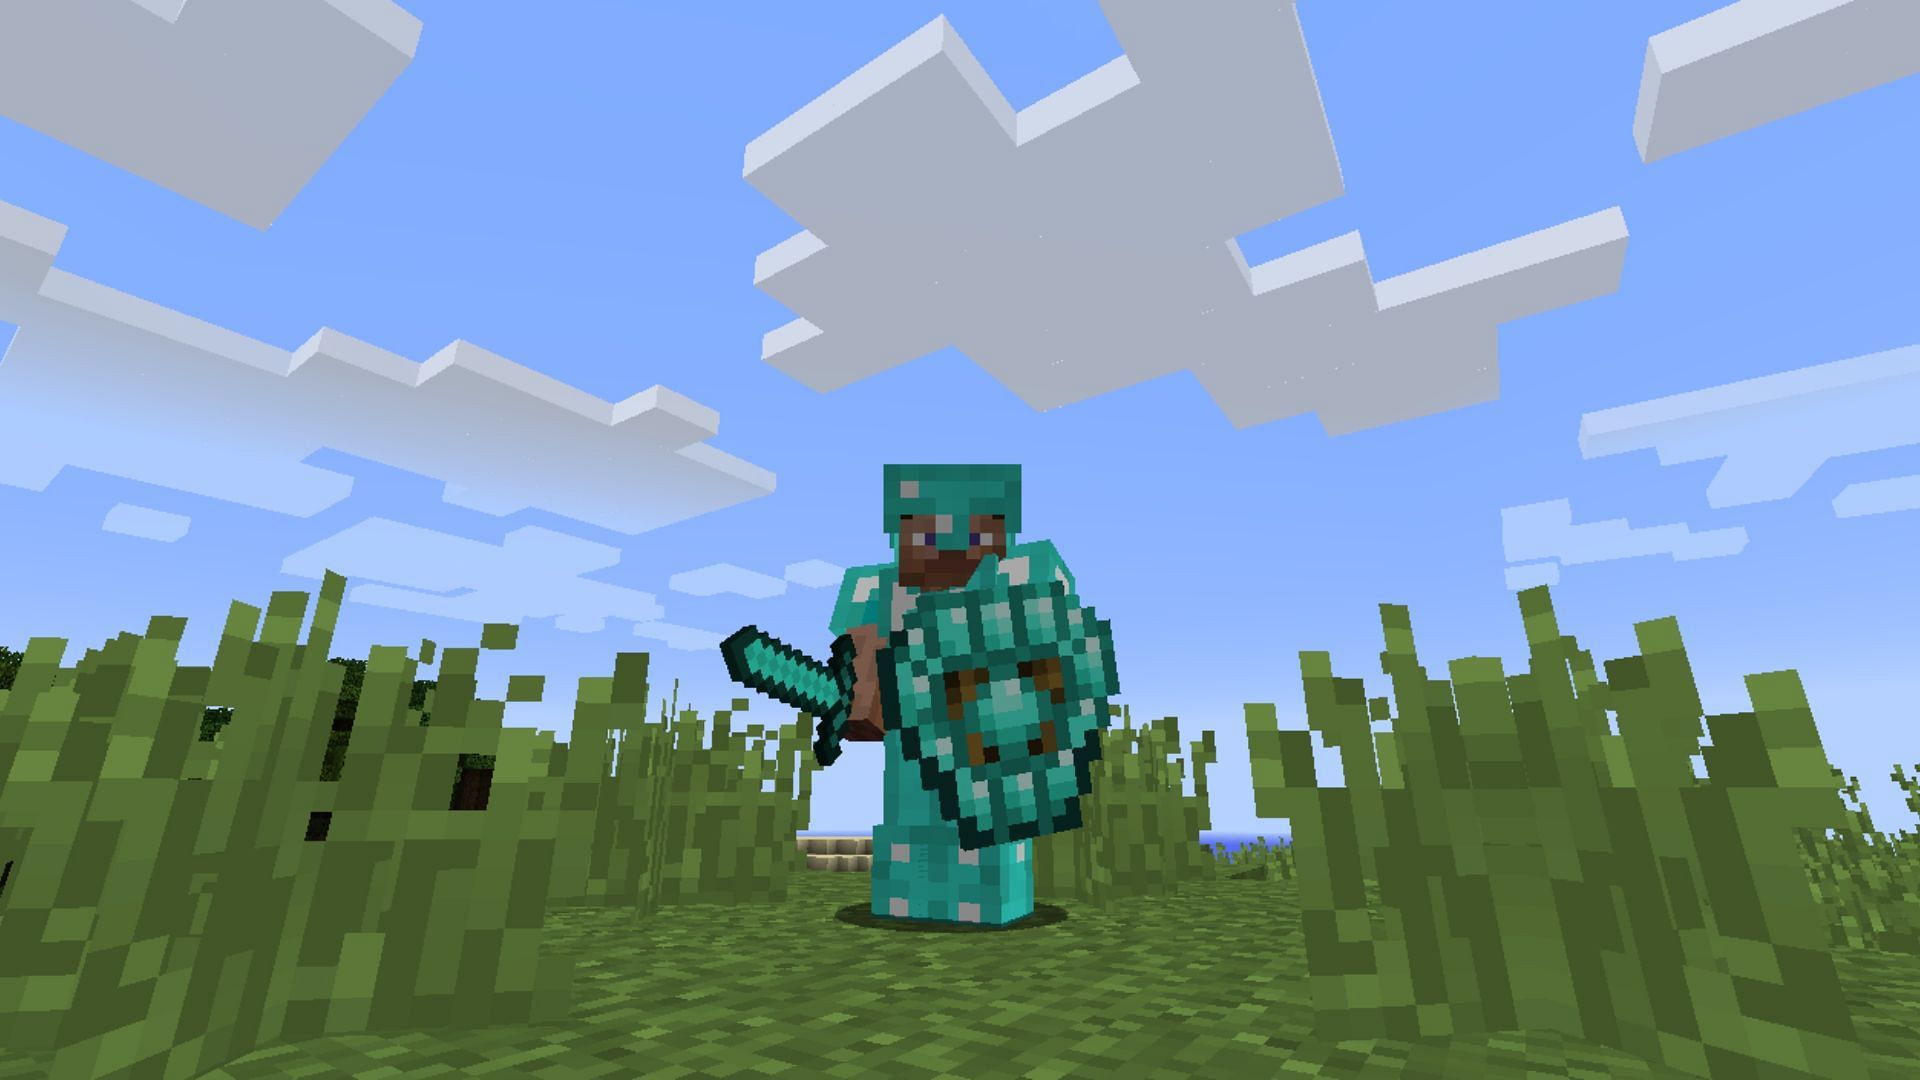 Spartan Shields is one of the most popular mods for shields in Minecraft. (Image via CurseForge)